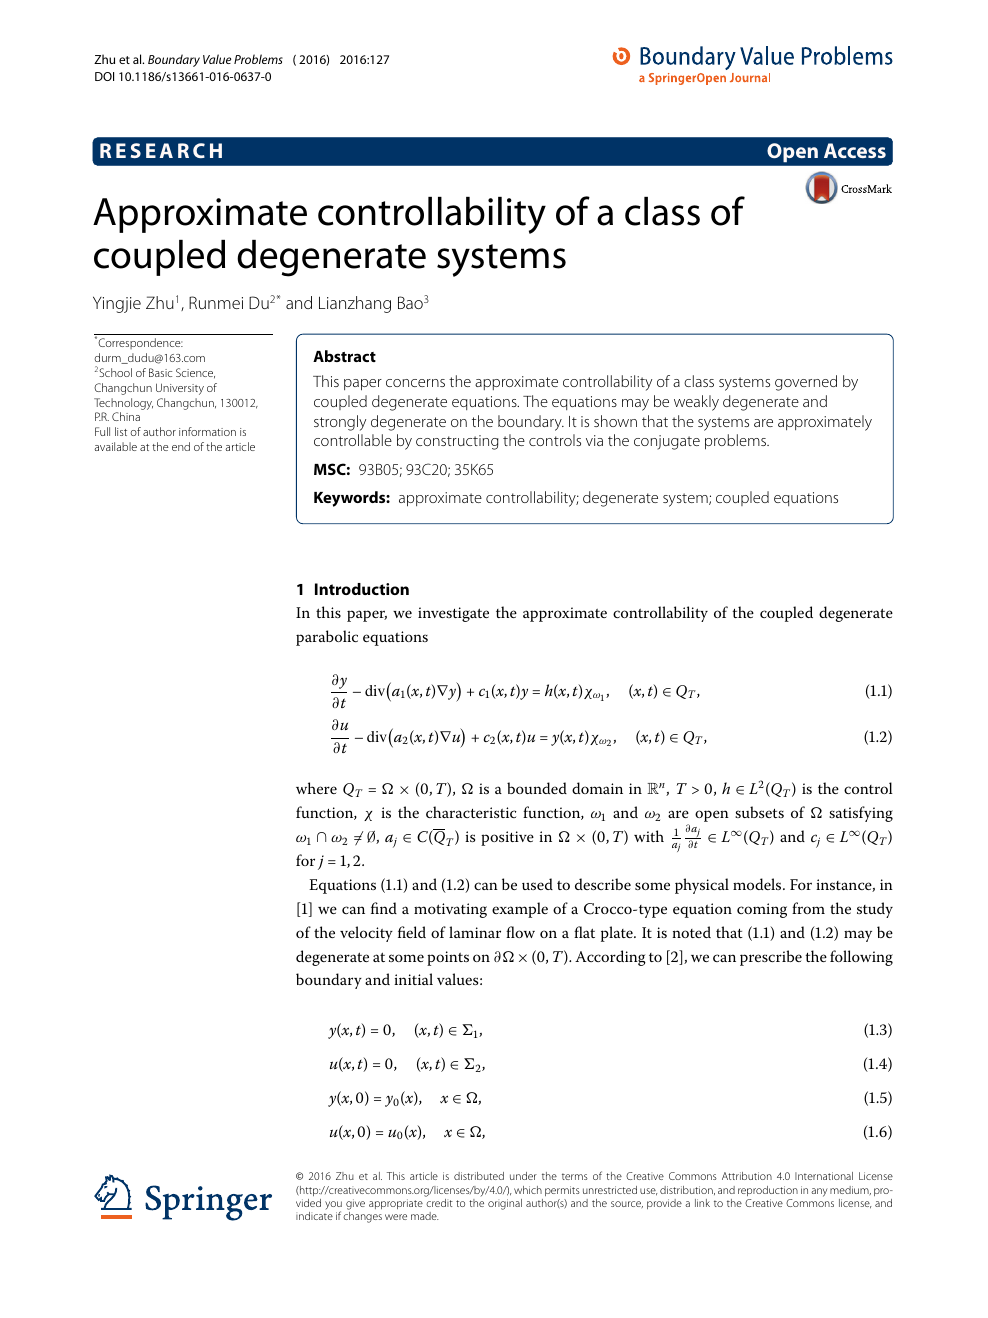 Approximate Controllability Of A Class Of Coupled Degenerate Systems Topic Of Research Paper In Mathematics Download Scholarly Article Pdf And Read For Free On Cyberleninka Open Science Hub